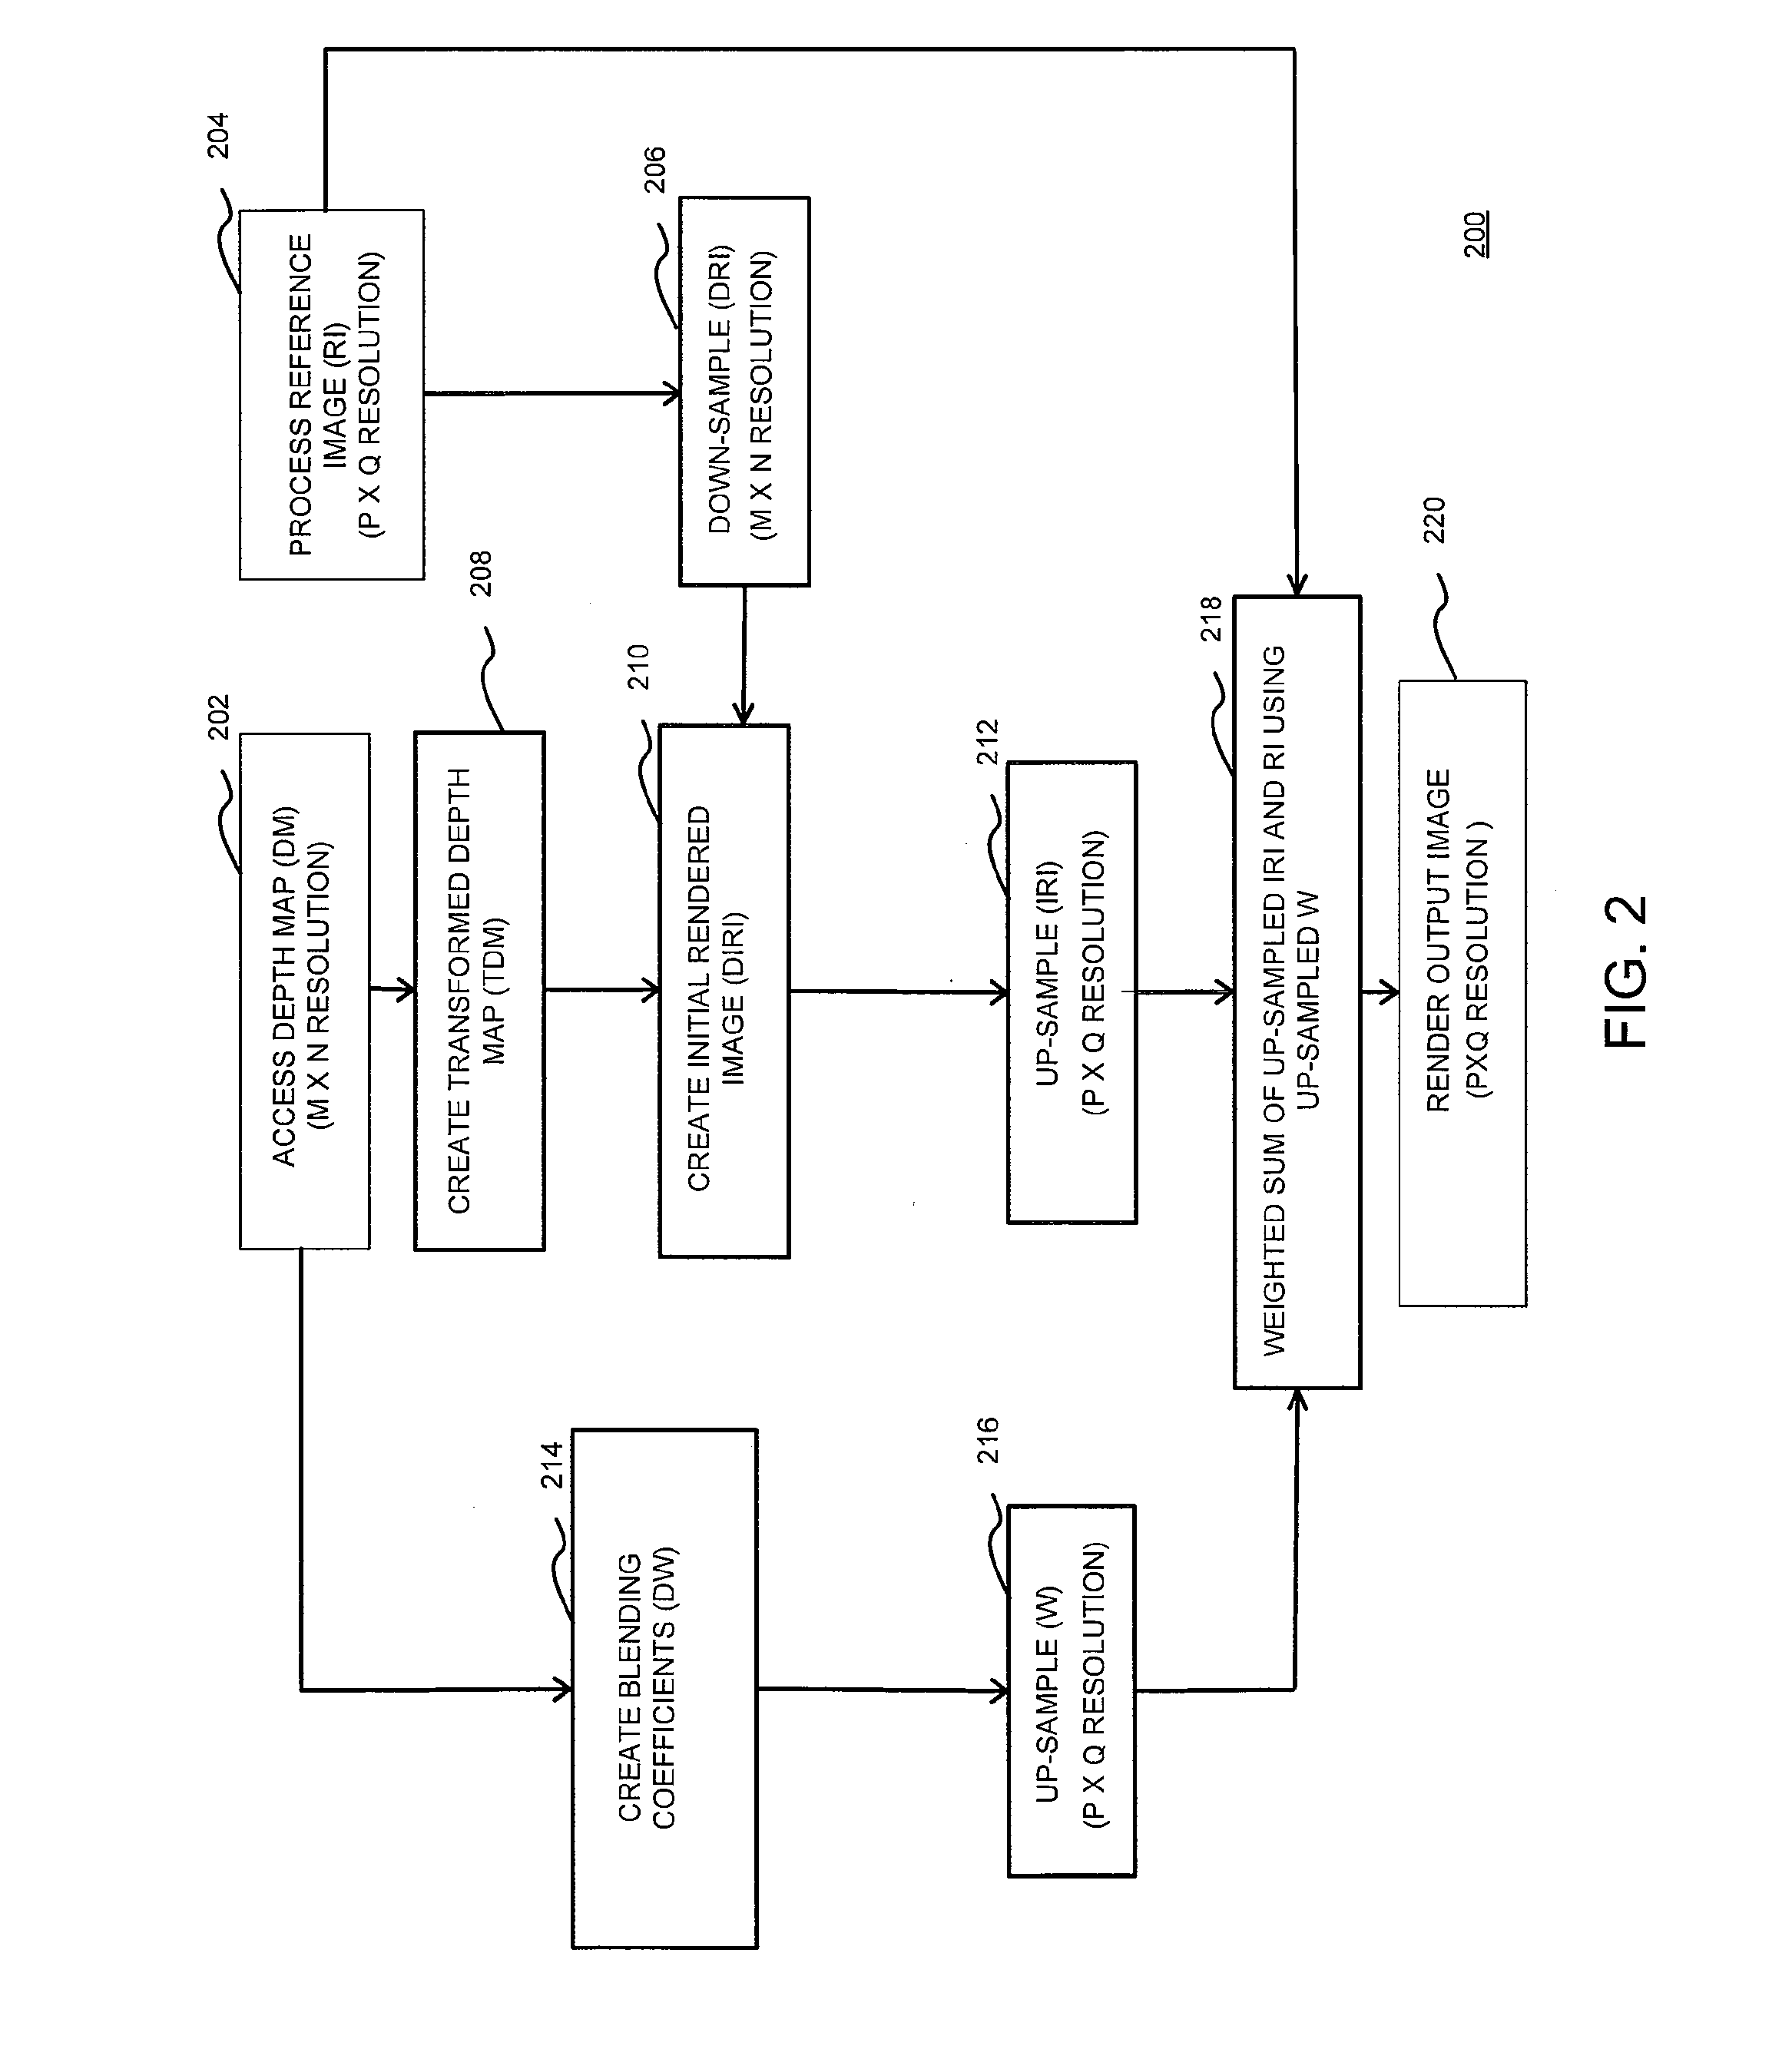 Method and apparatus for performing a blur rendering process on an image